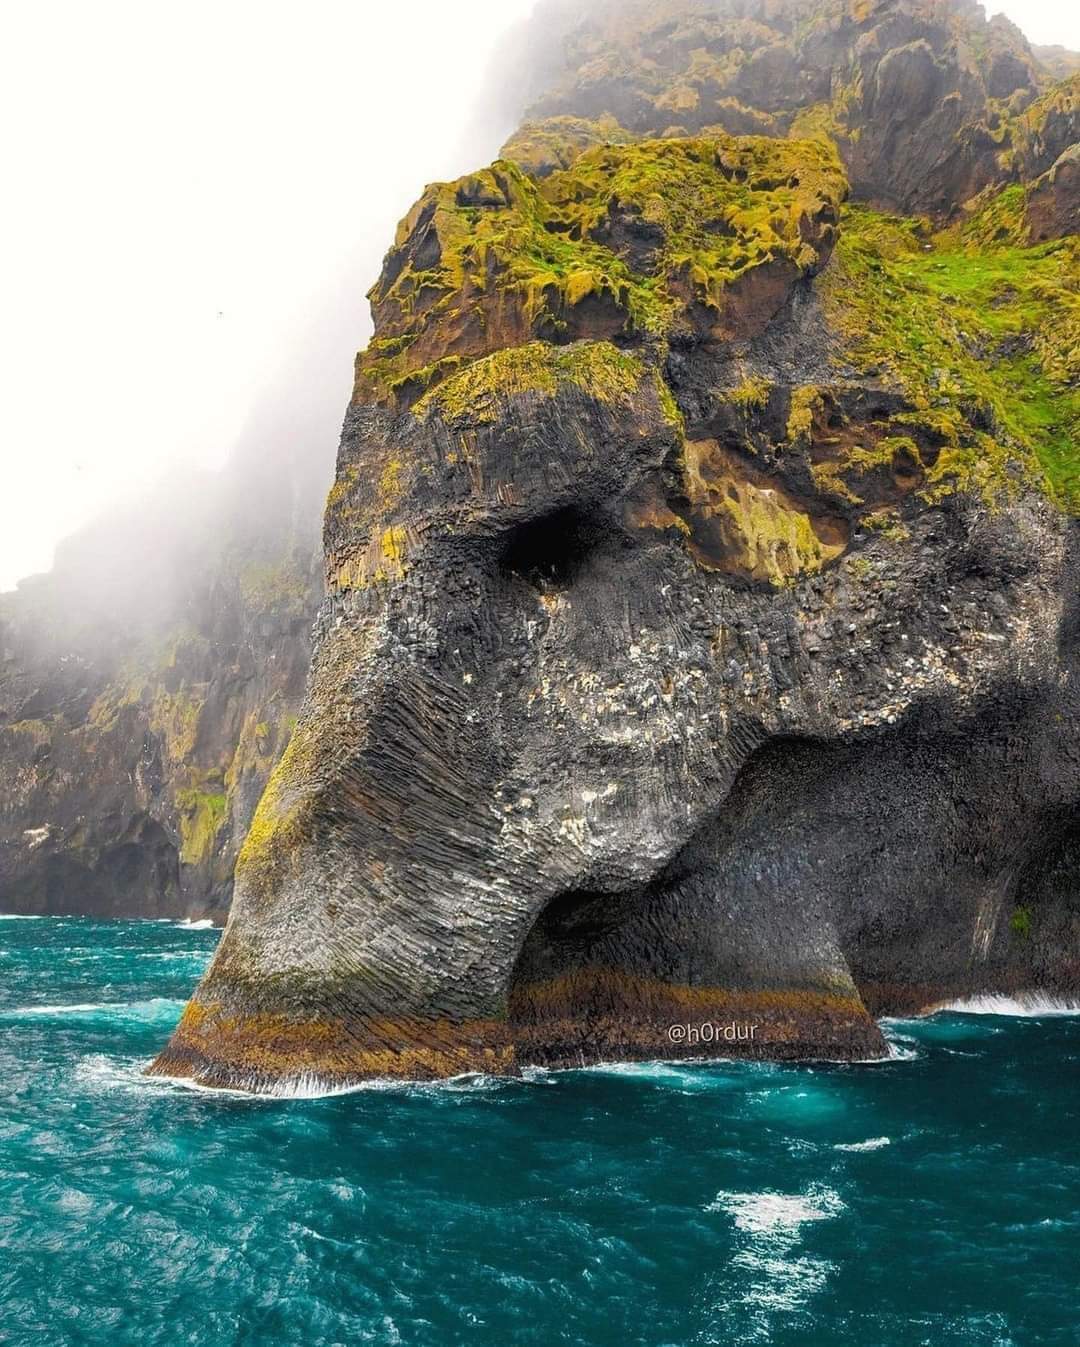 The famous Elephant Rock in Iceland